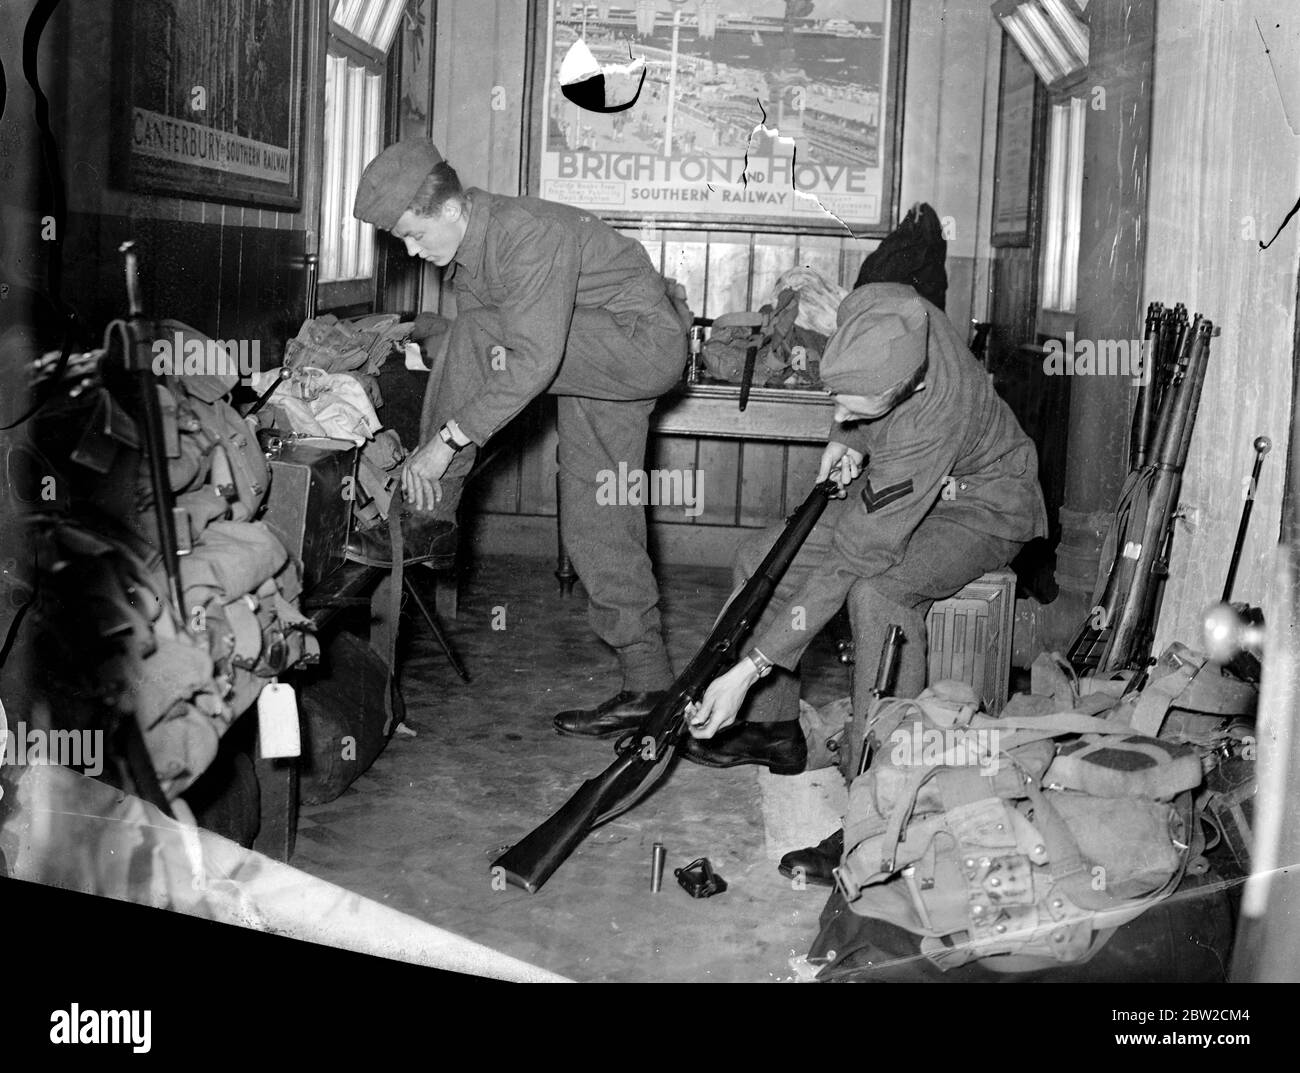 Military guards have been installed at vital points in London, including railway stations, goods yards and important municipal buildings. A waiting-room used by soldiers at a London railway station. 30 August 1939 Stock Photo